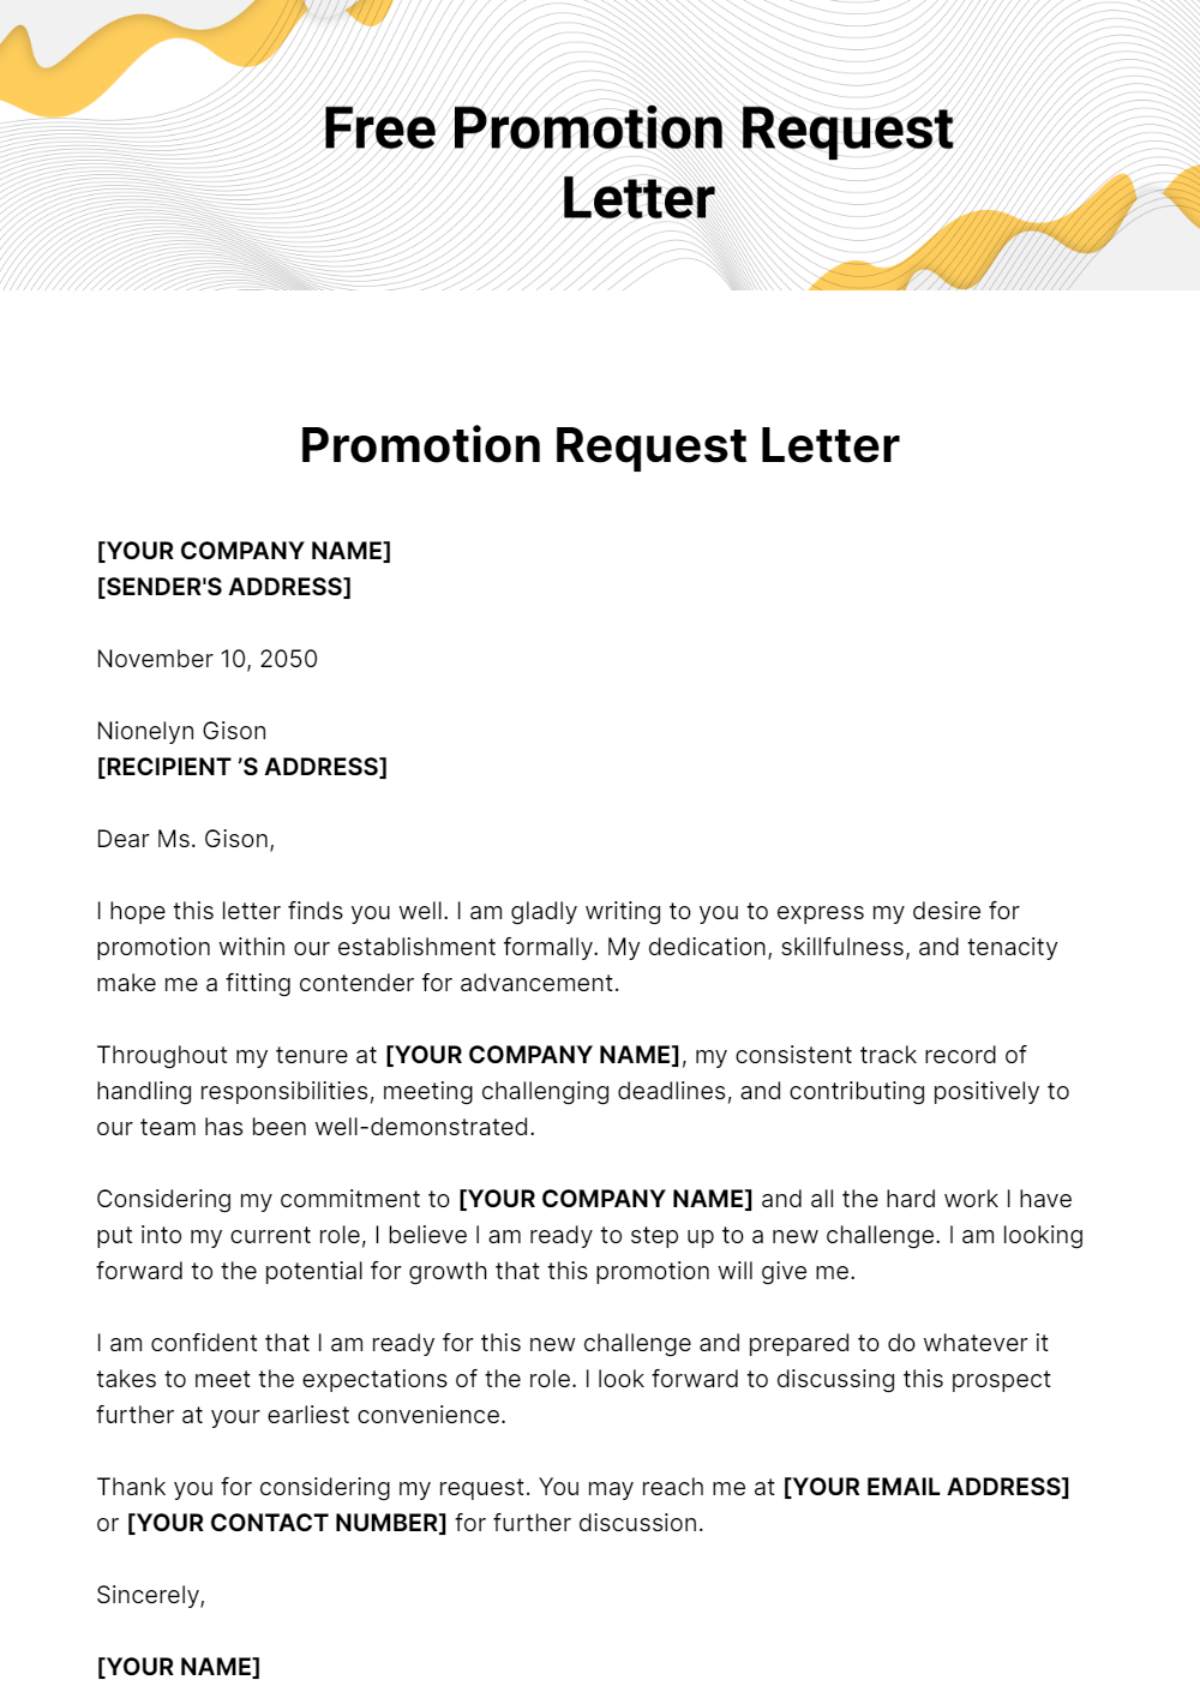 Free Promotion Request Letter Template